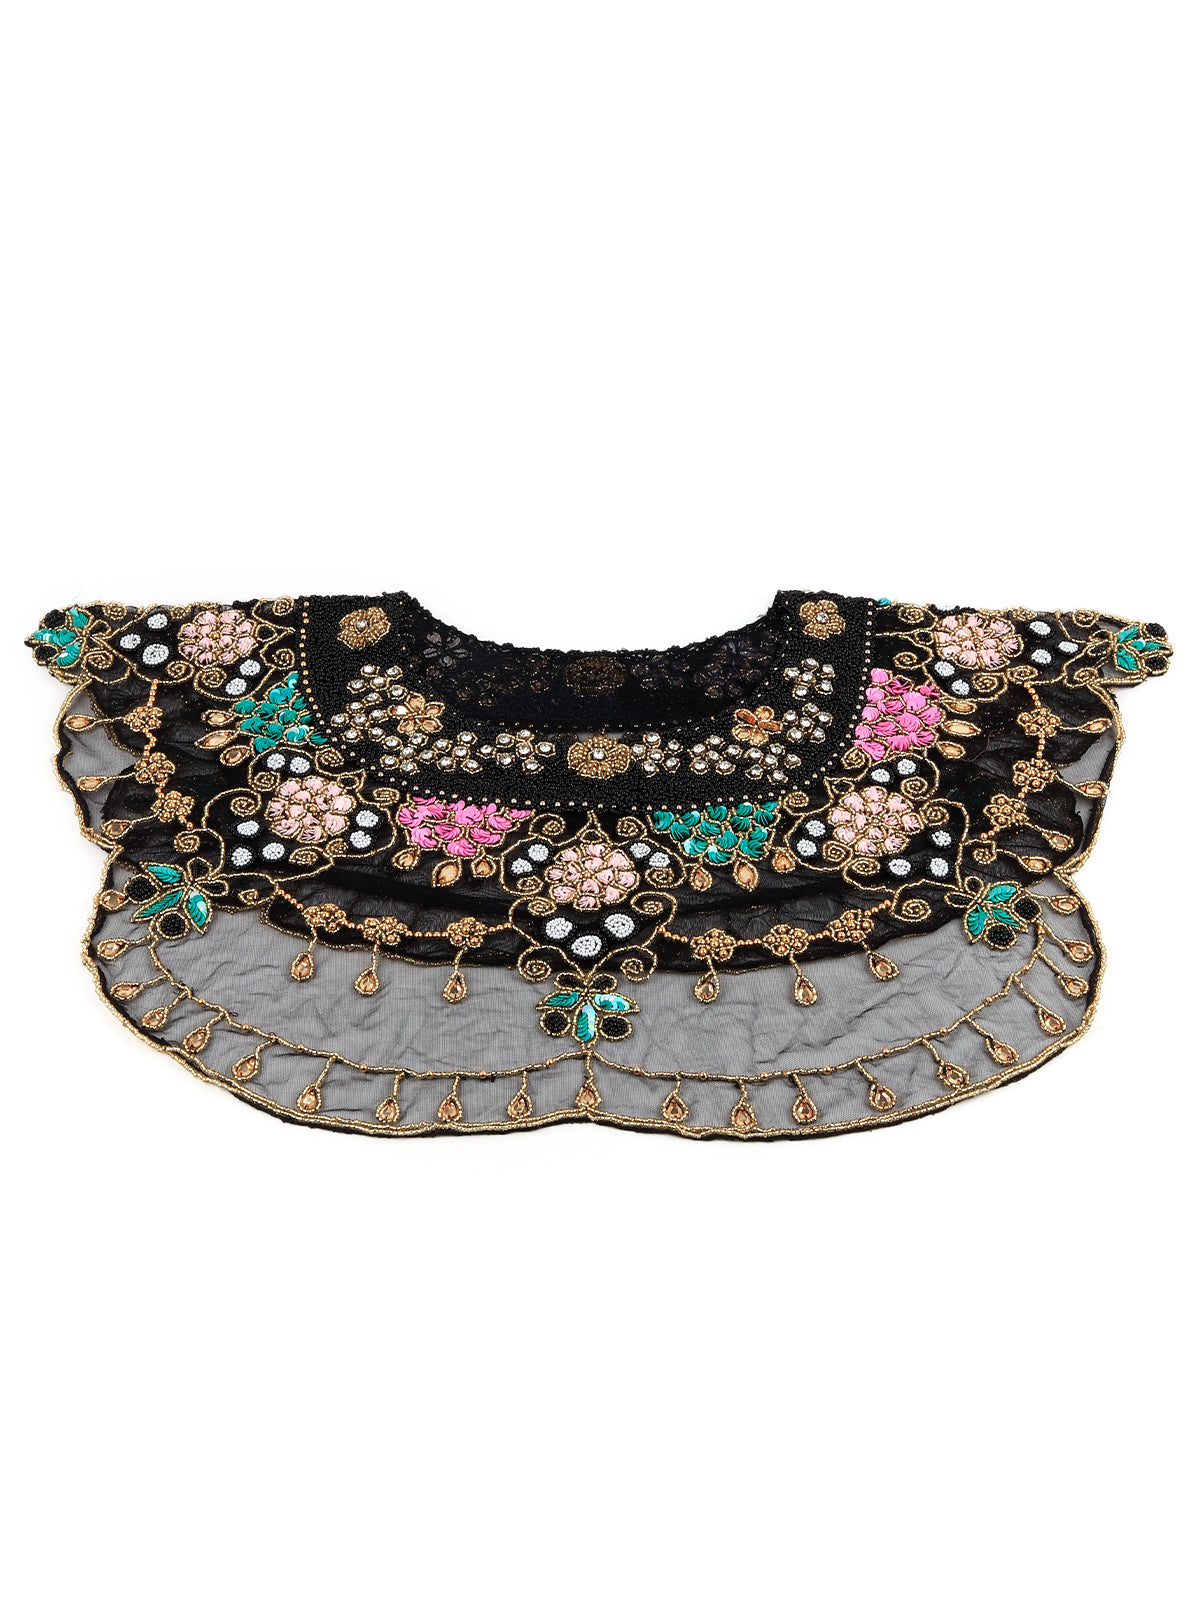 Odette Women The Glamorous Black With Multicolored Embroidered Cape